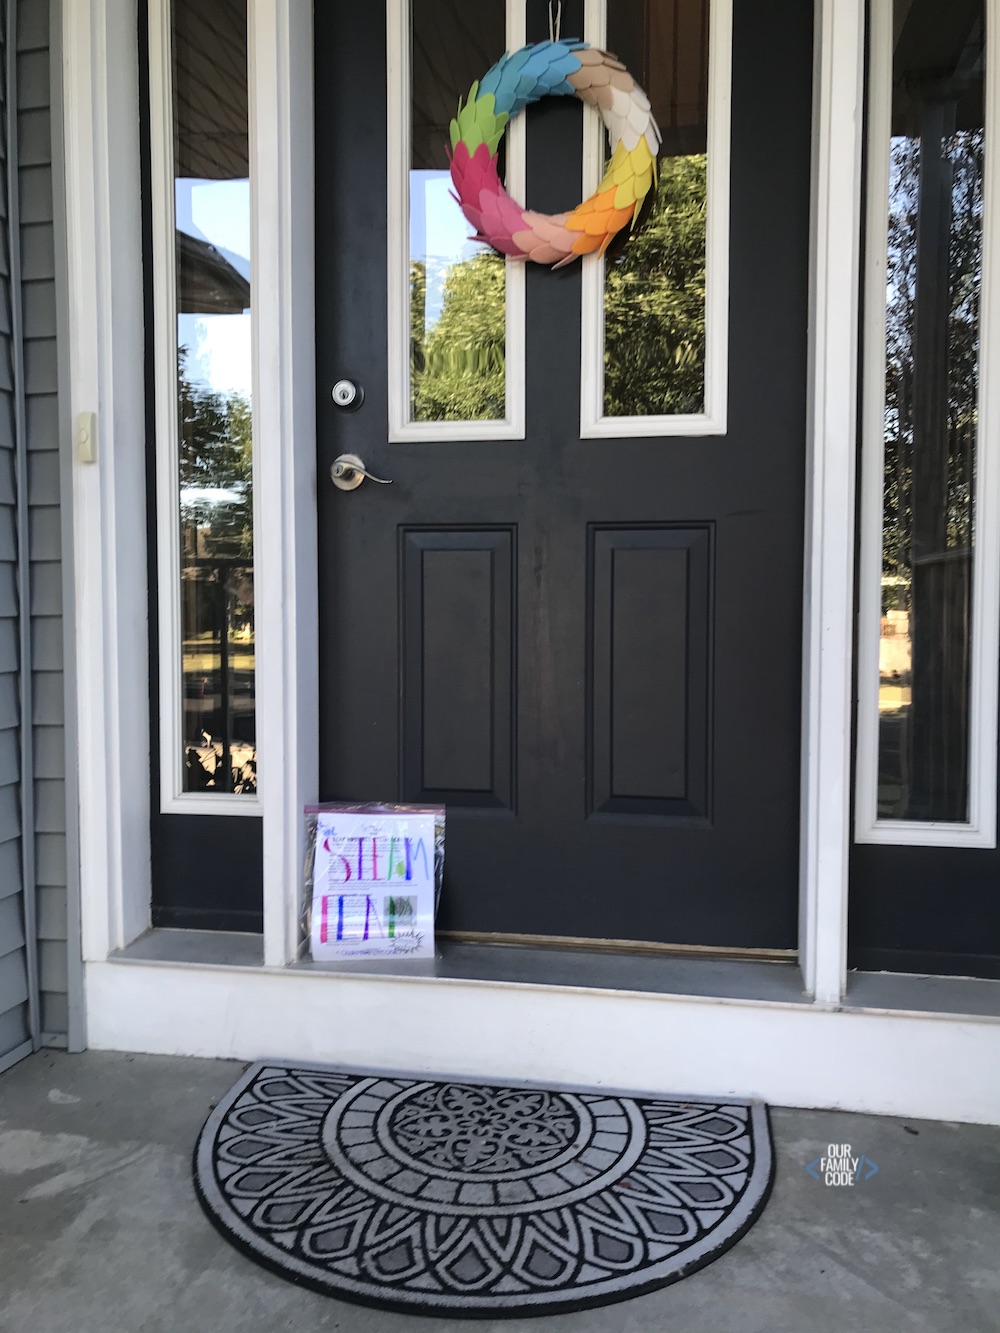 porch drop off remote learning activities